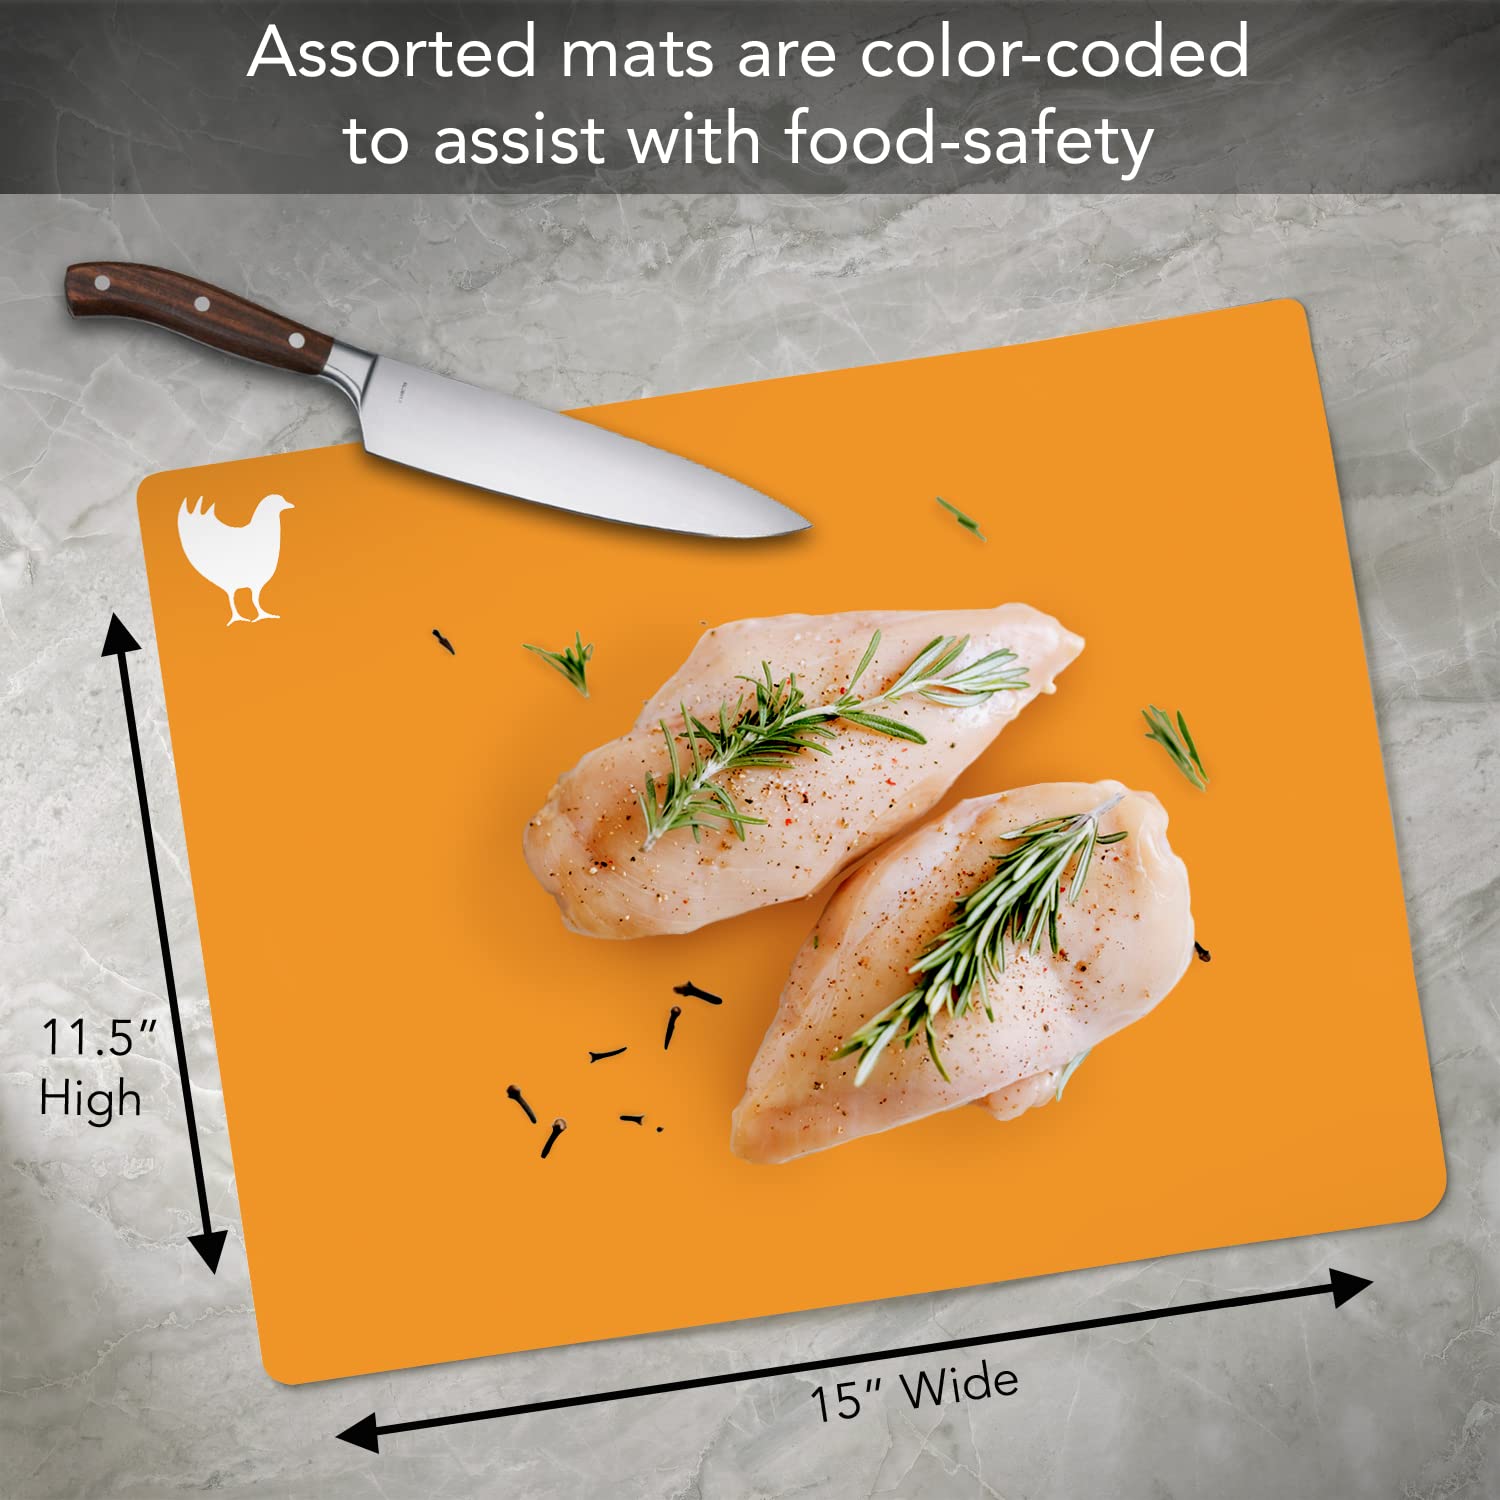 Cut N' Funnel Multi-Colored Flexible Plastic Cutting Board Mats 4 Pack Made in the USA Flexible, BPA Free, Dishwasher Safe